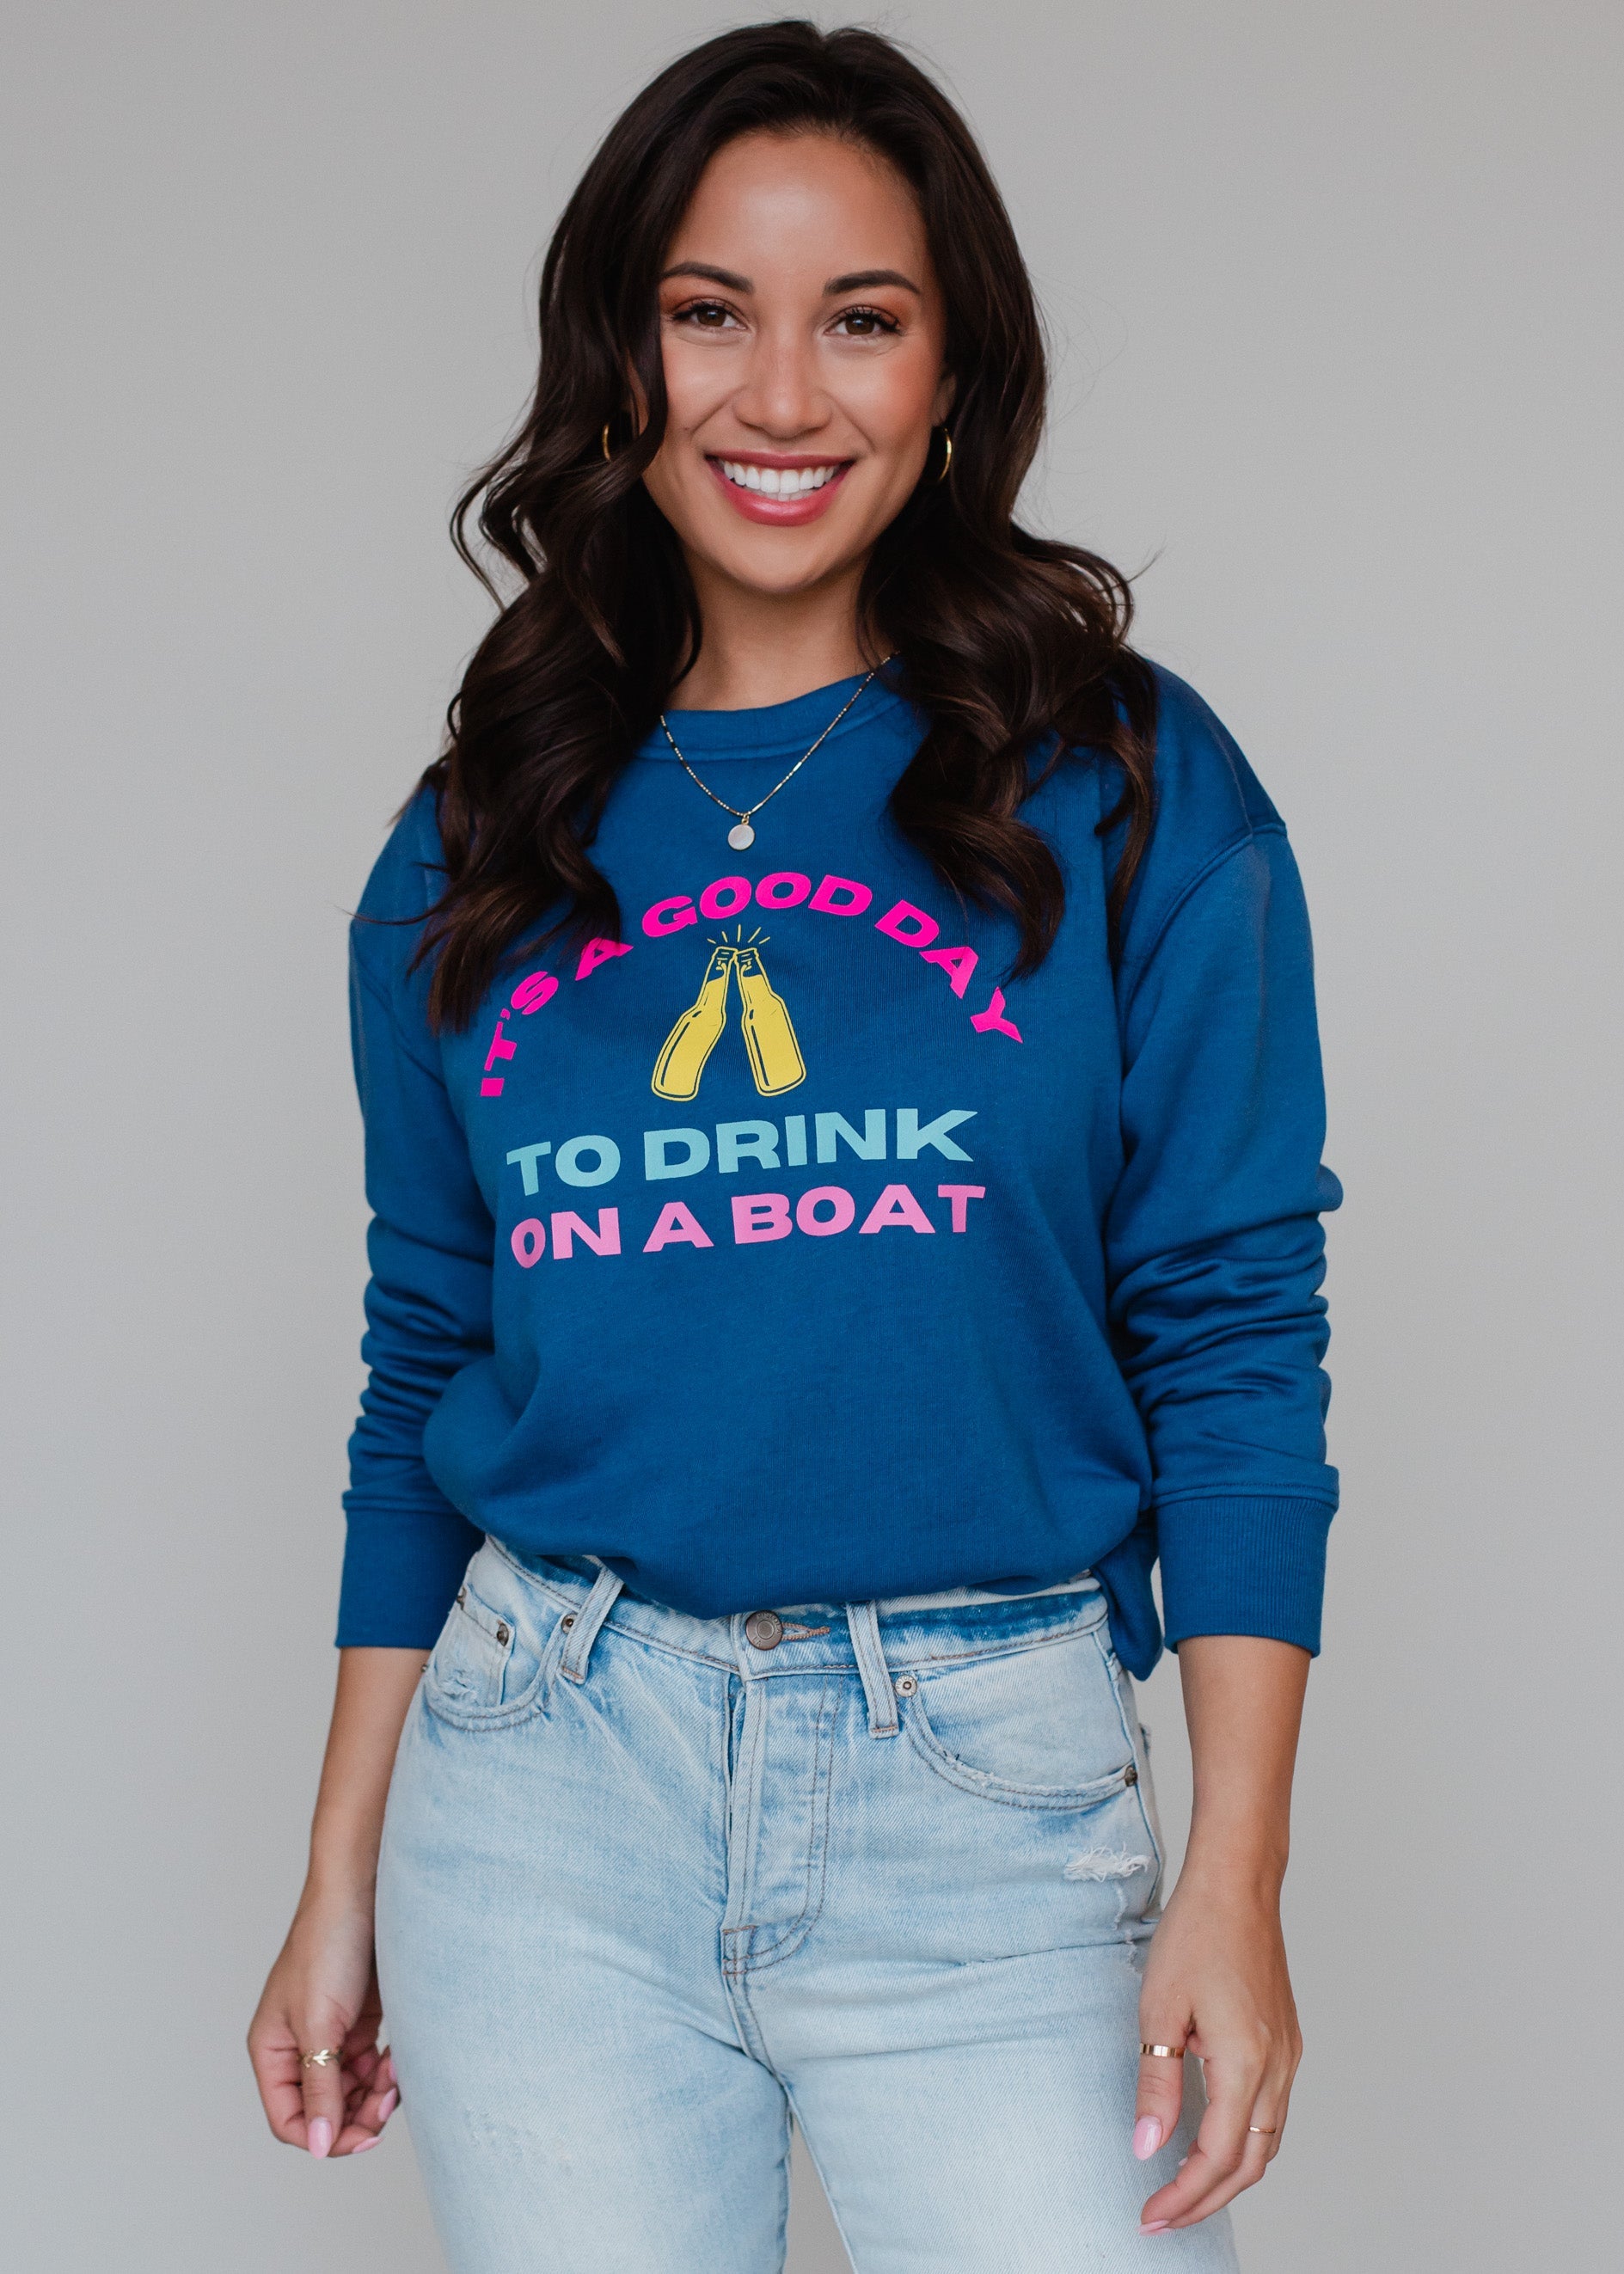 Colorful Drink On A Boat Sweatshirt